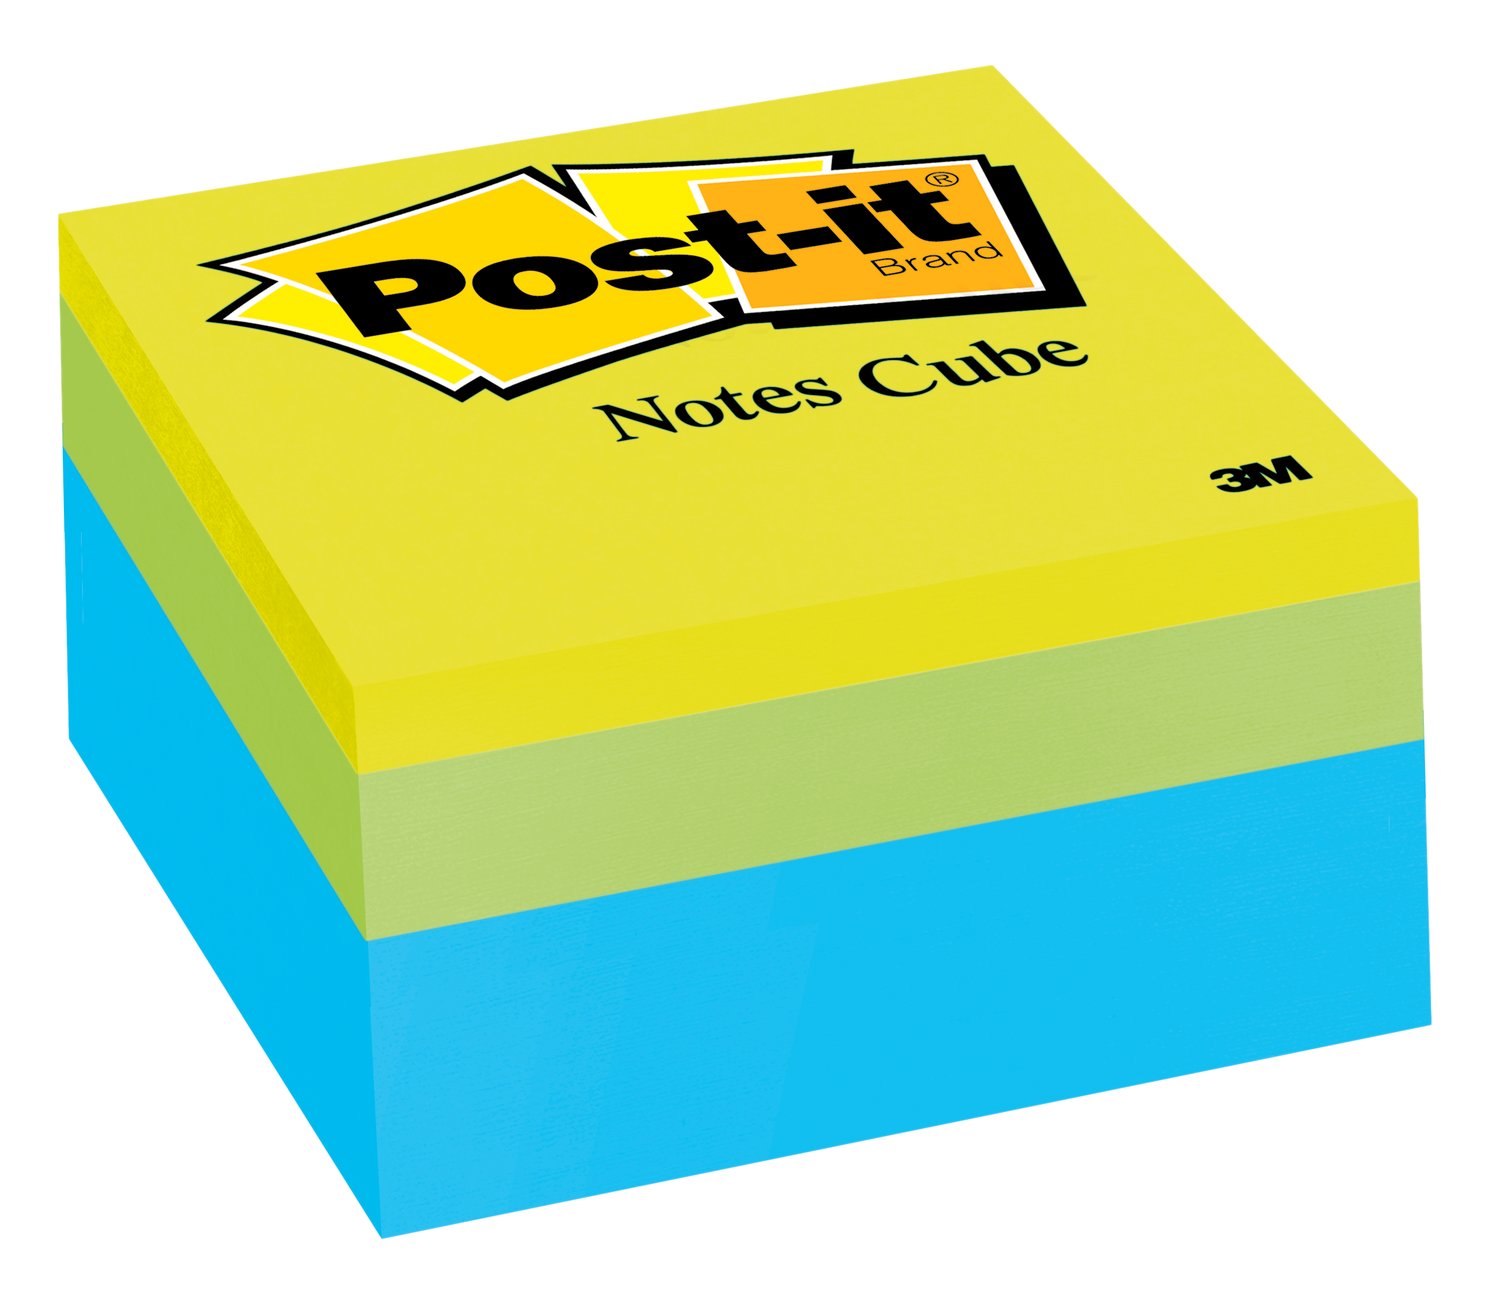 7100155181 - Post-it Notes Cube, 2054-PP, 3 in x 3 in (76 mm x 76 mm), 400 sheets